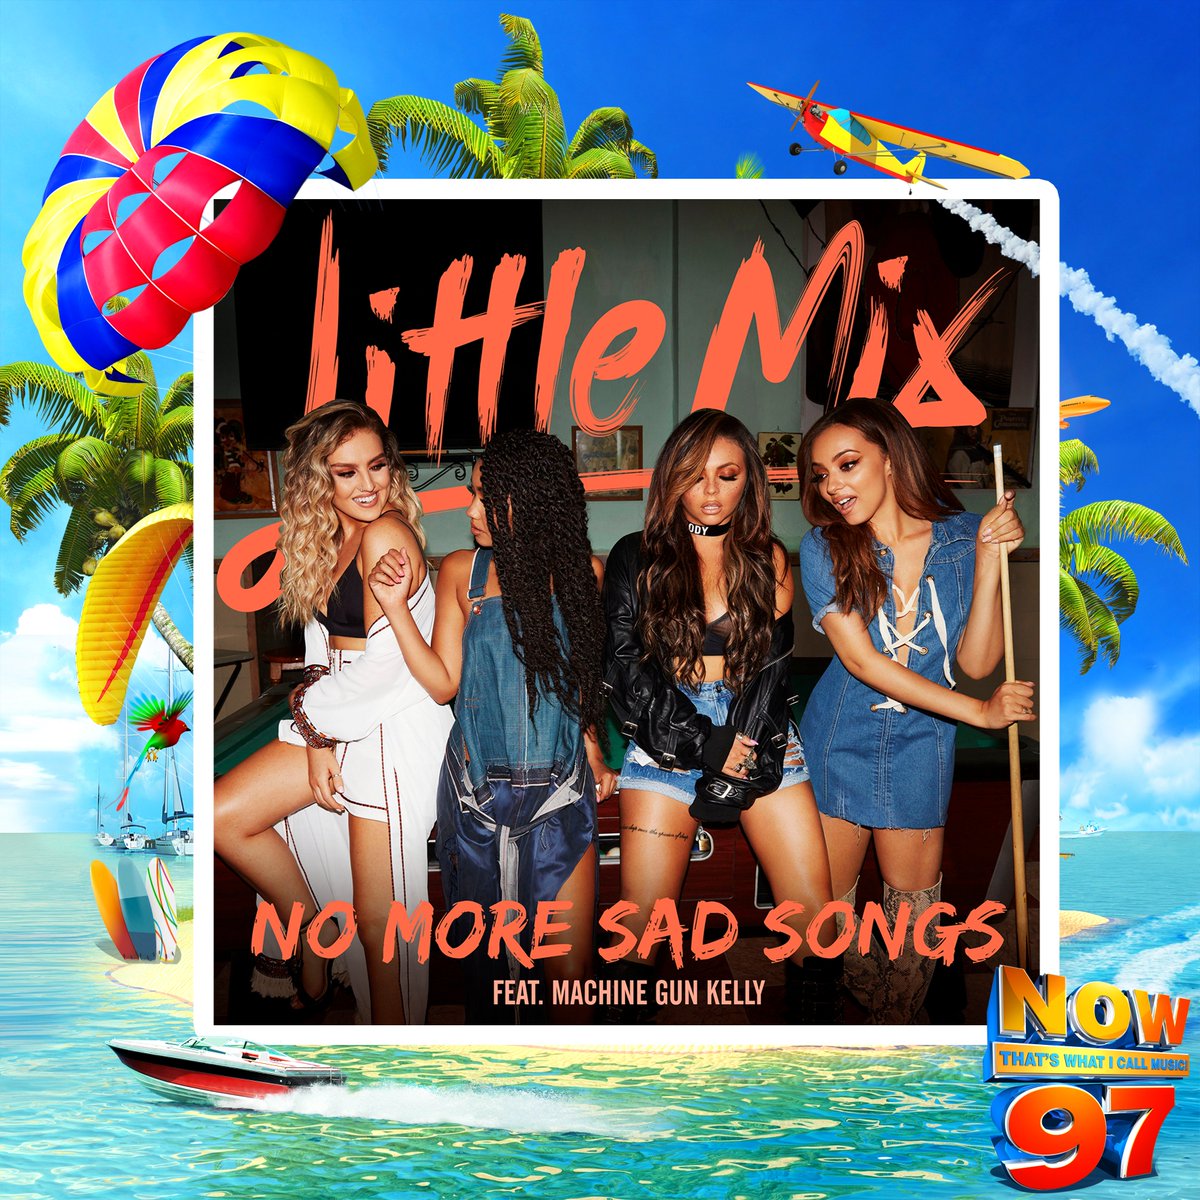 Now That S What I Call Music Congrats To Littlemix Who Make 2 Appearances On Now97 With Power Feat Stormzy1 No More Sad Songs Feat Machinegunkelly T Co Sfkkjkpyha